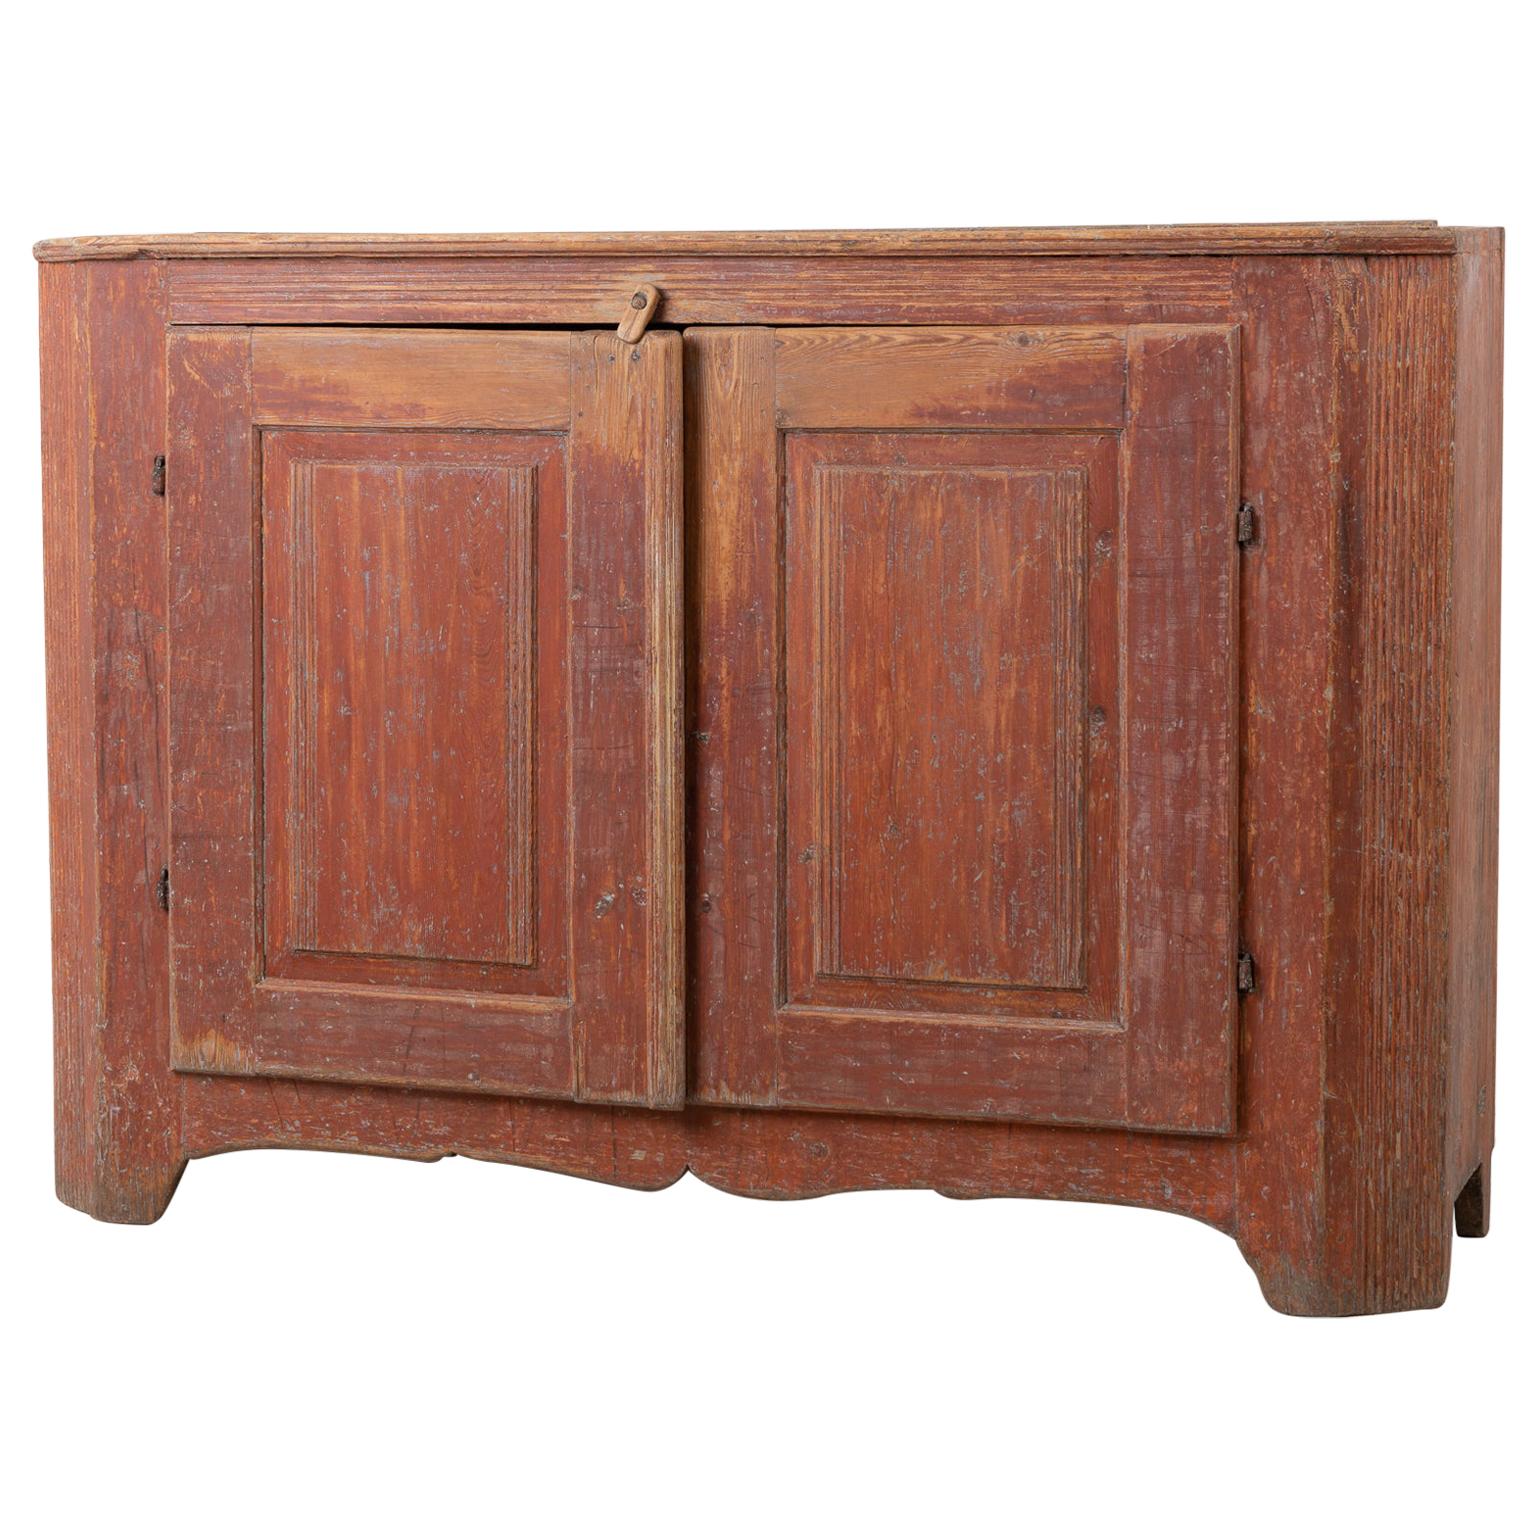 Swedish Neoclassical Sideboard with Rococo Details